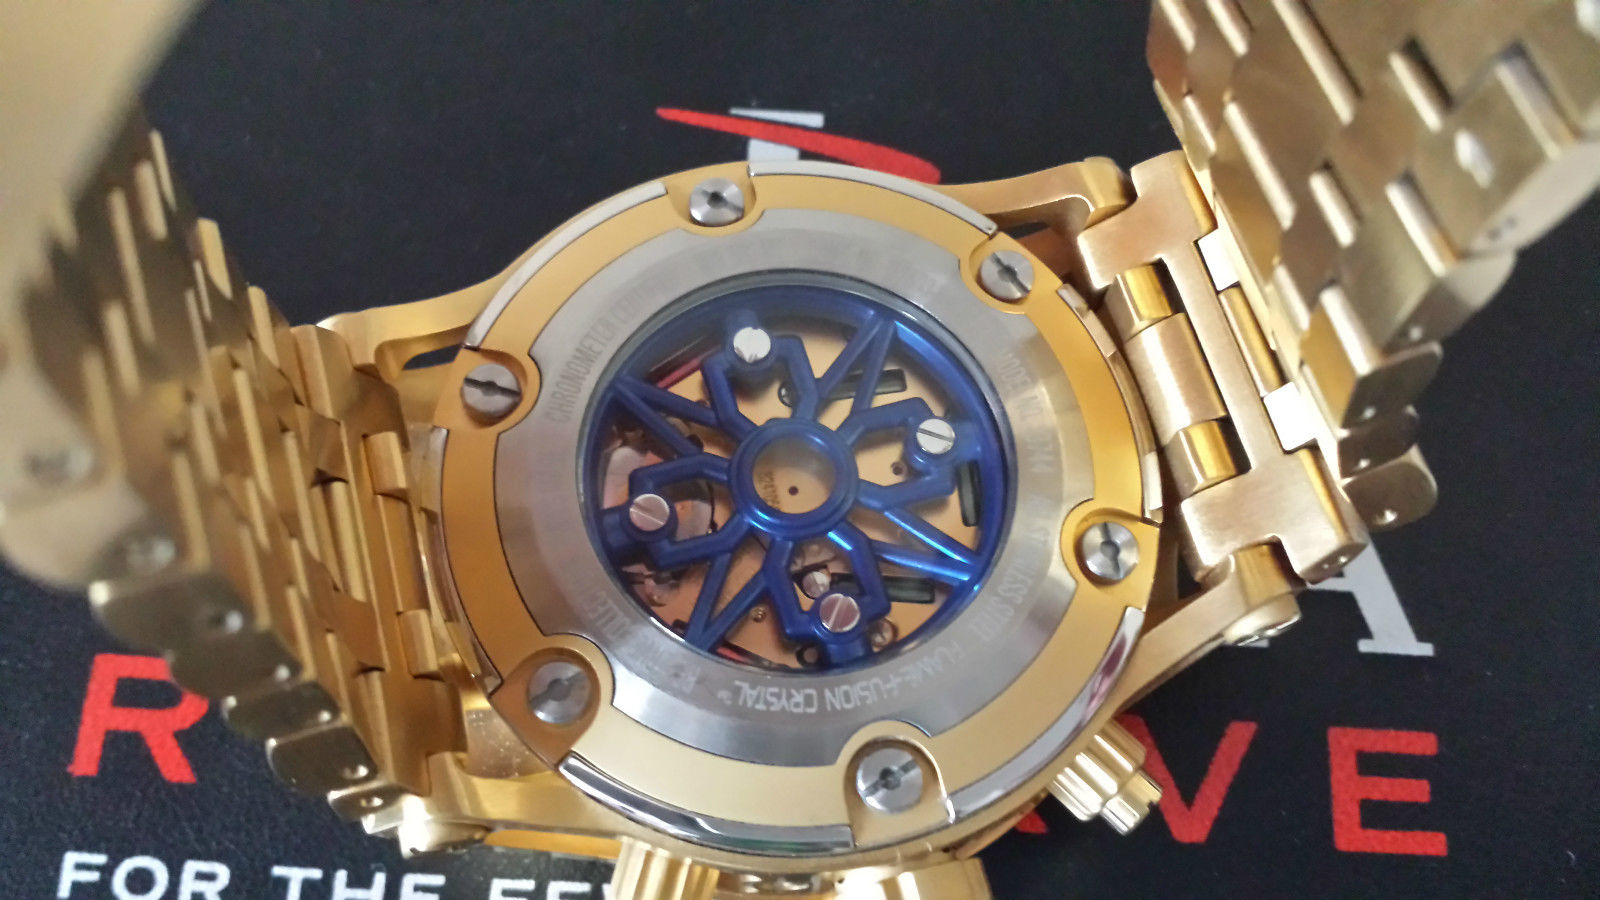 Invicta Reserve 1568 Dive Watch Gold Chronograph,boxed all papers included along with price- $4995 - Image 5 of 9